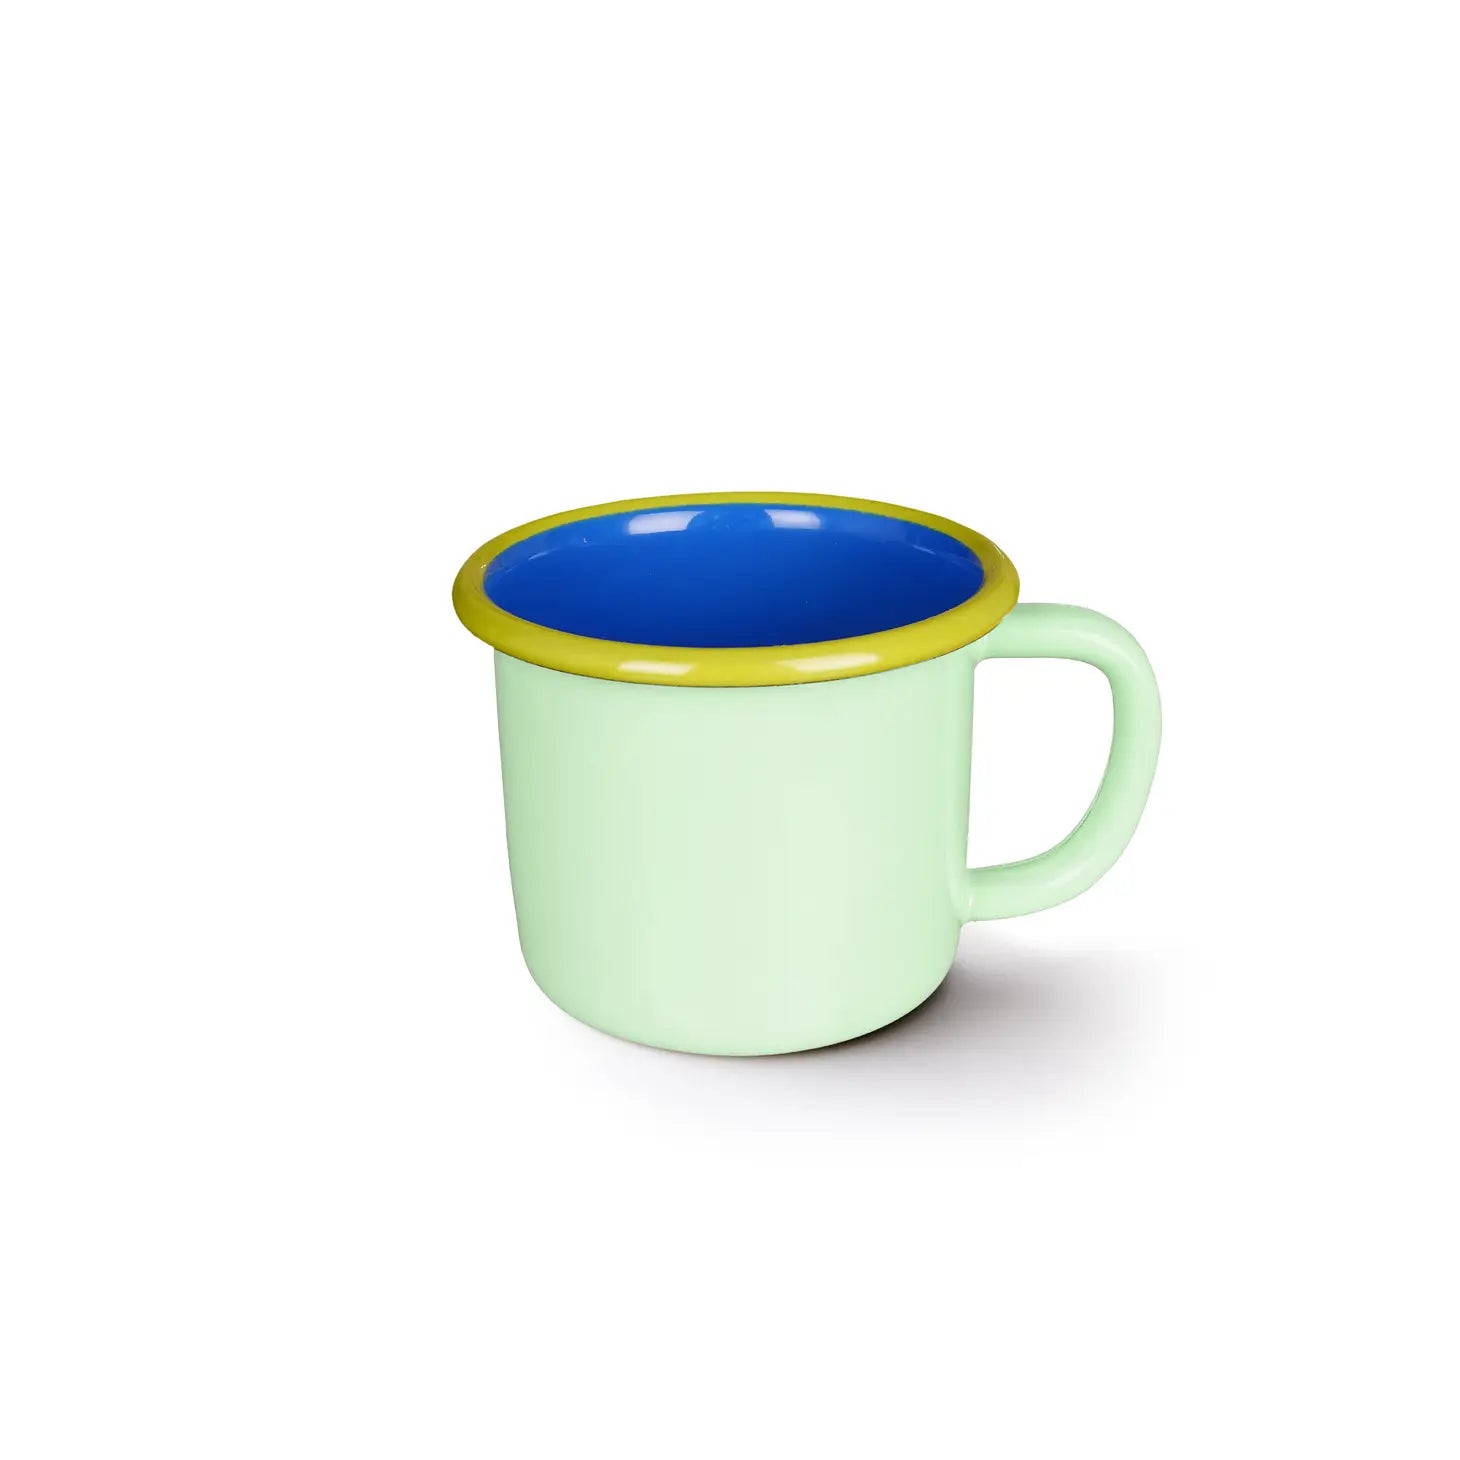 Colorama 12oz Mugs -- Assorted Color Combos